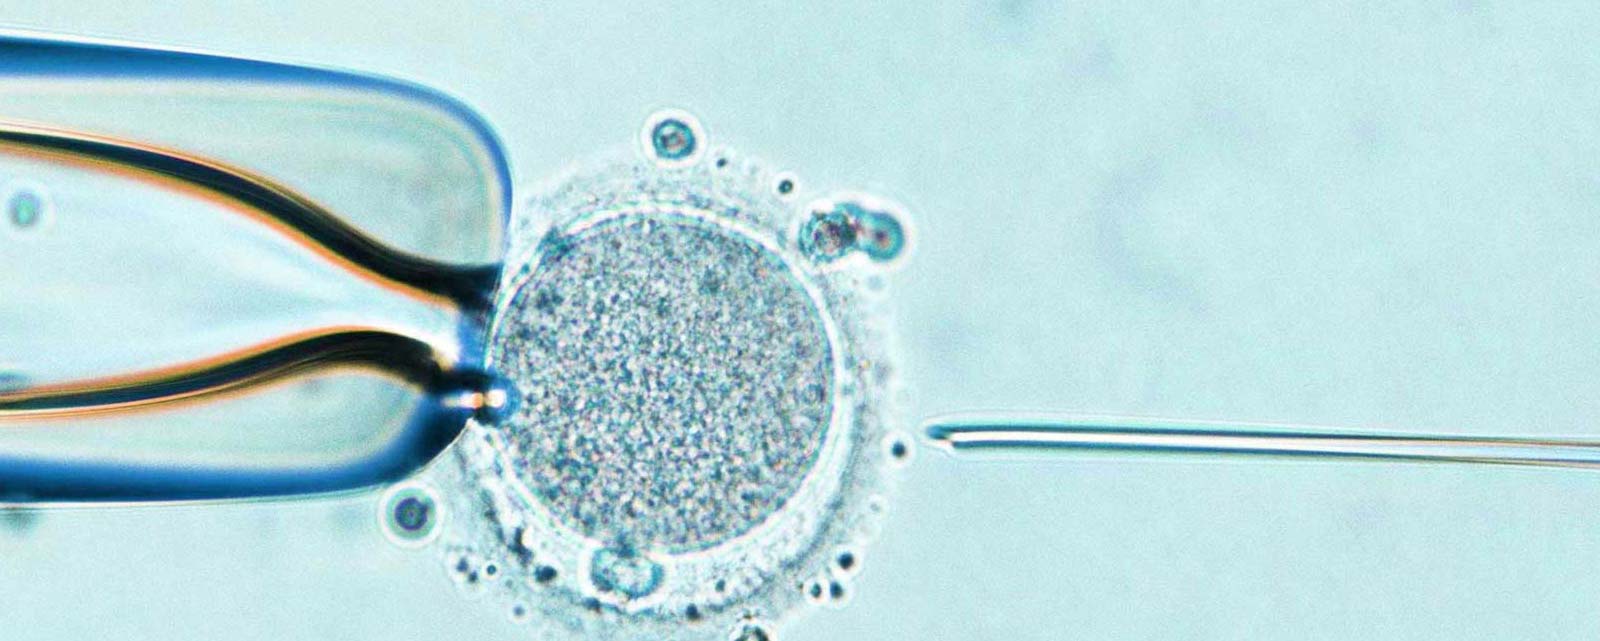 ivf ICSI IUI ART embryology courses in philippines, india and bangladesh